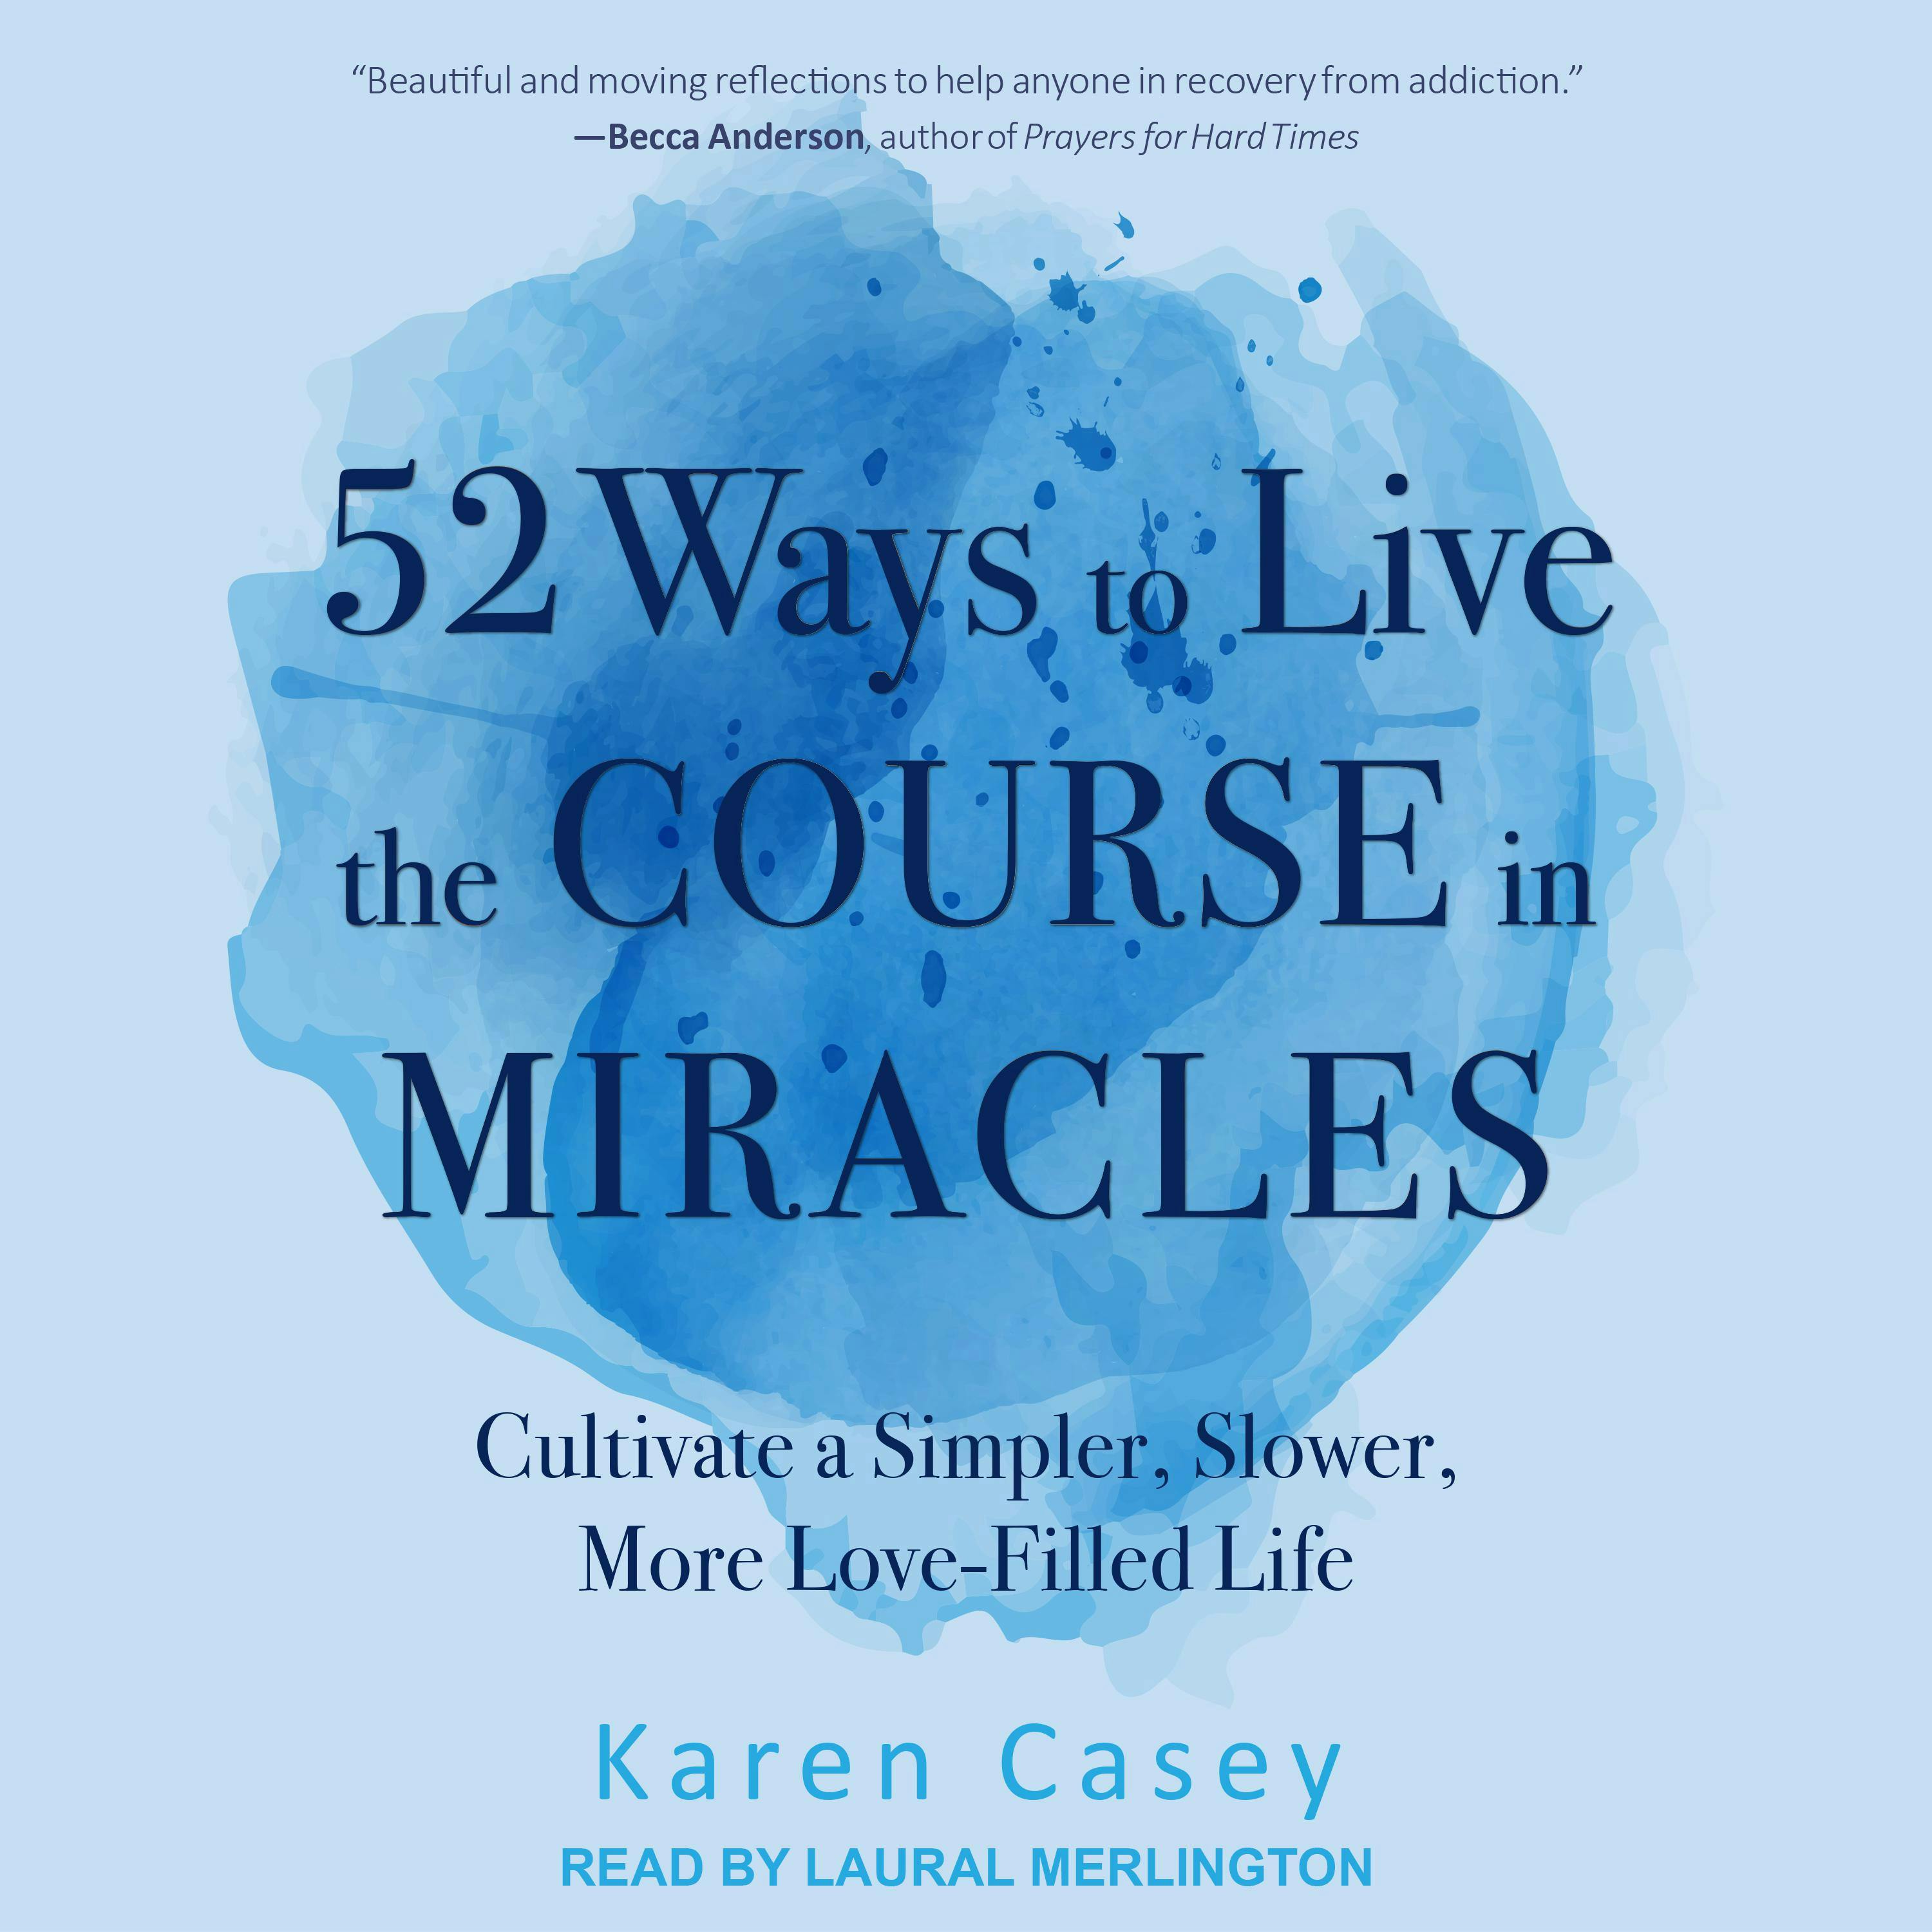 52 Ways to Live the Course in Miracles: Cultivate a Simpler, Slower, More Love-Filled Life - undefined